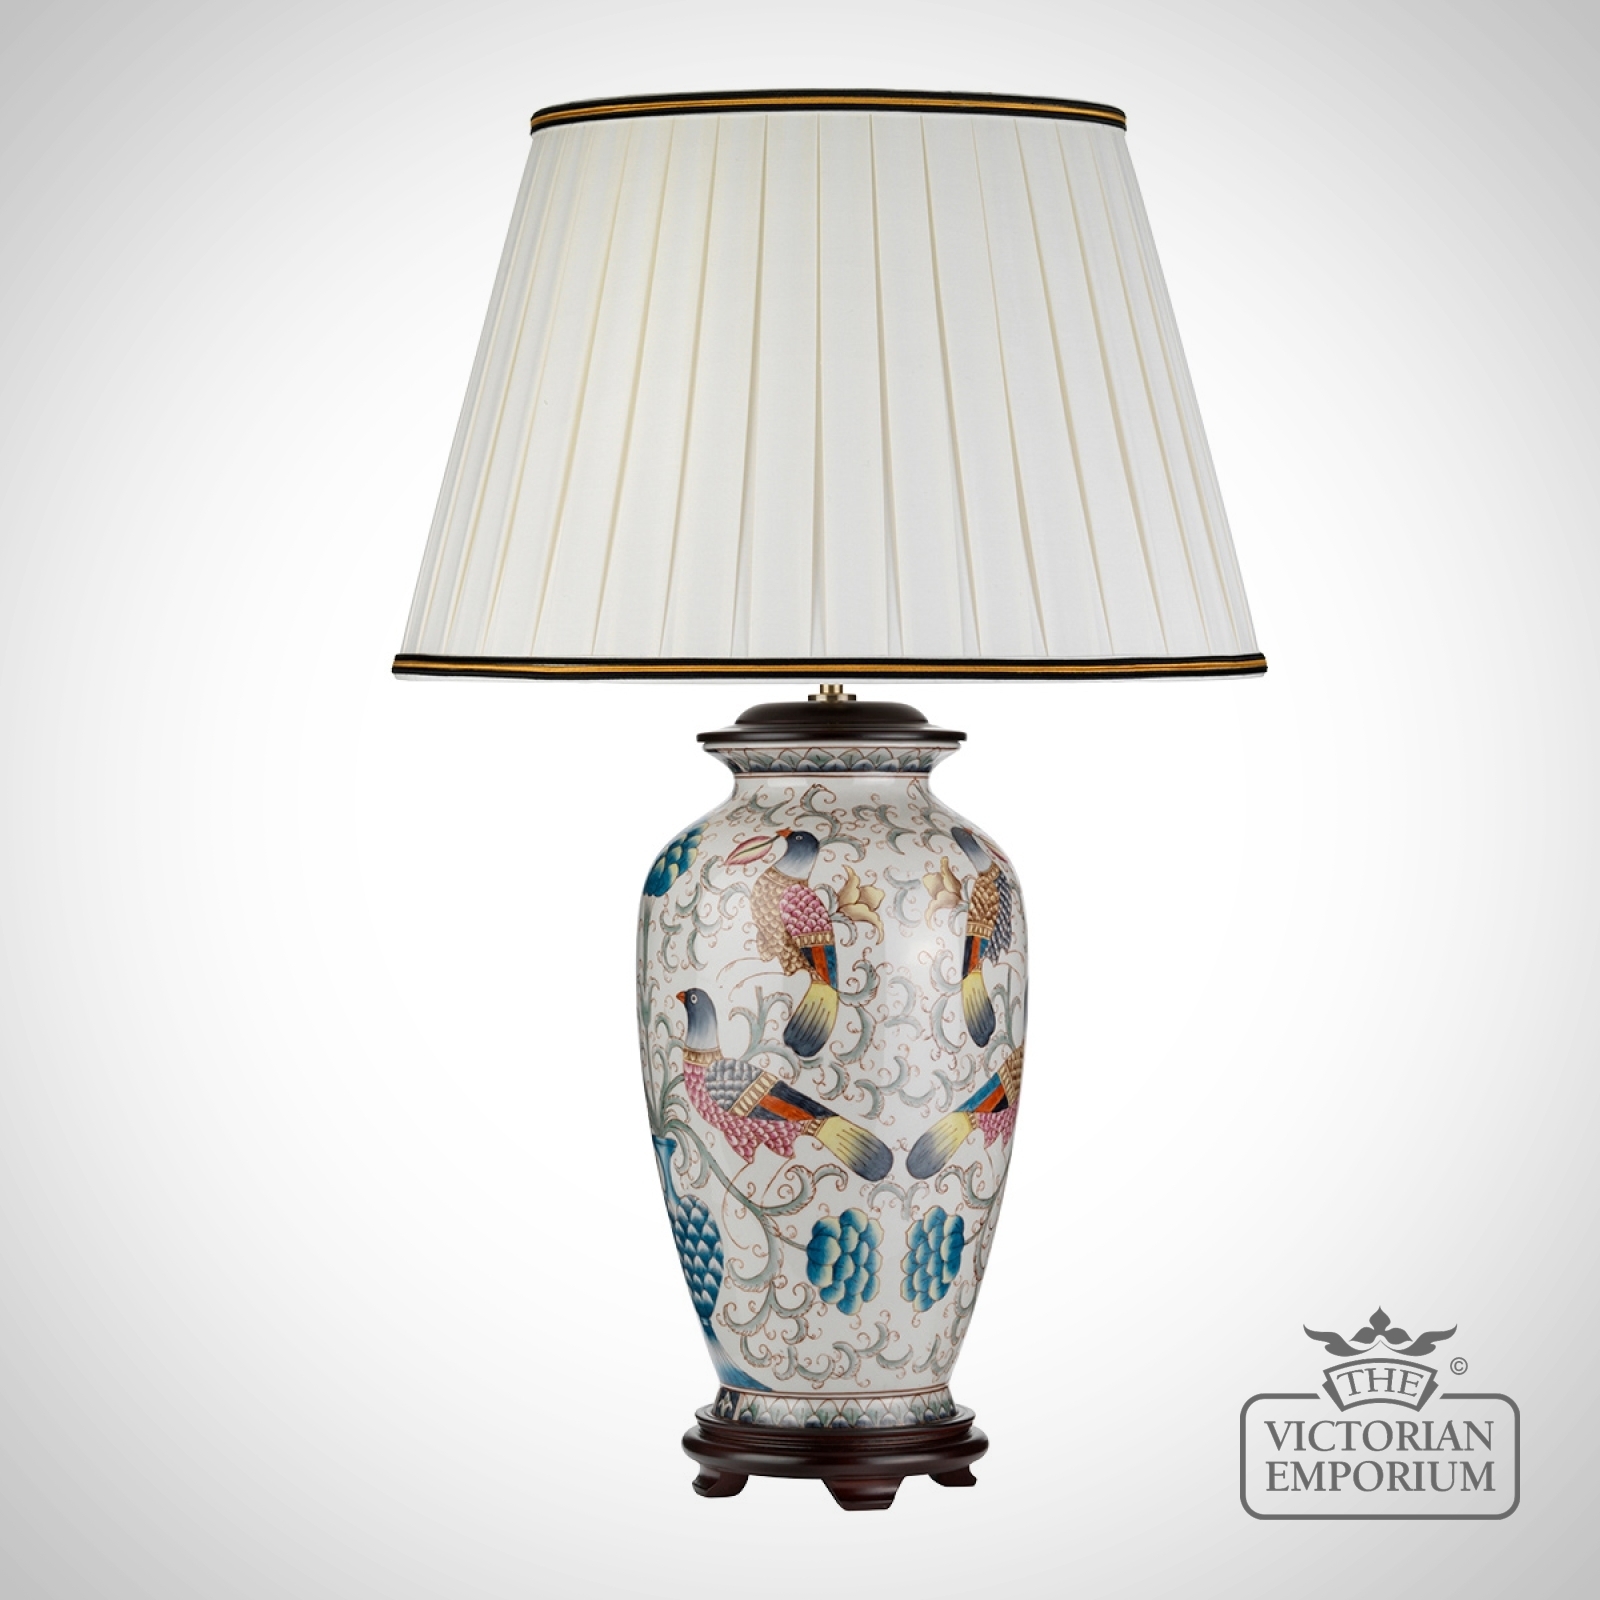 Ping Table Lamp with Porcelain Base and Fabric Shade